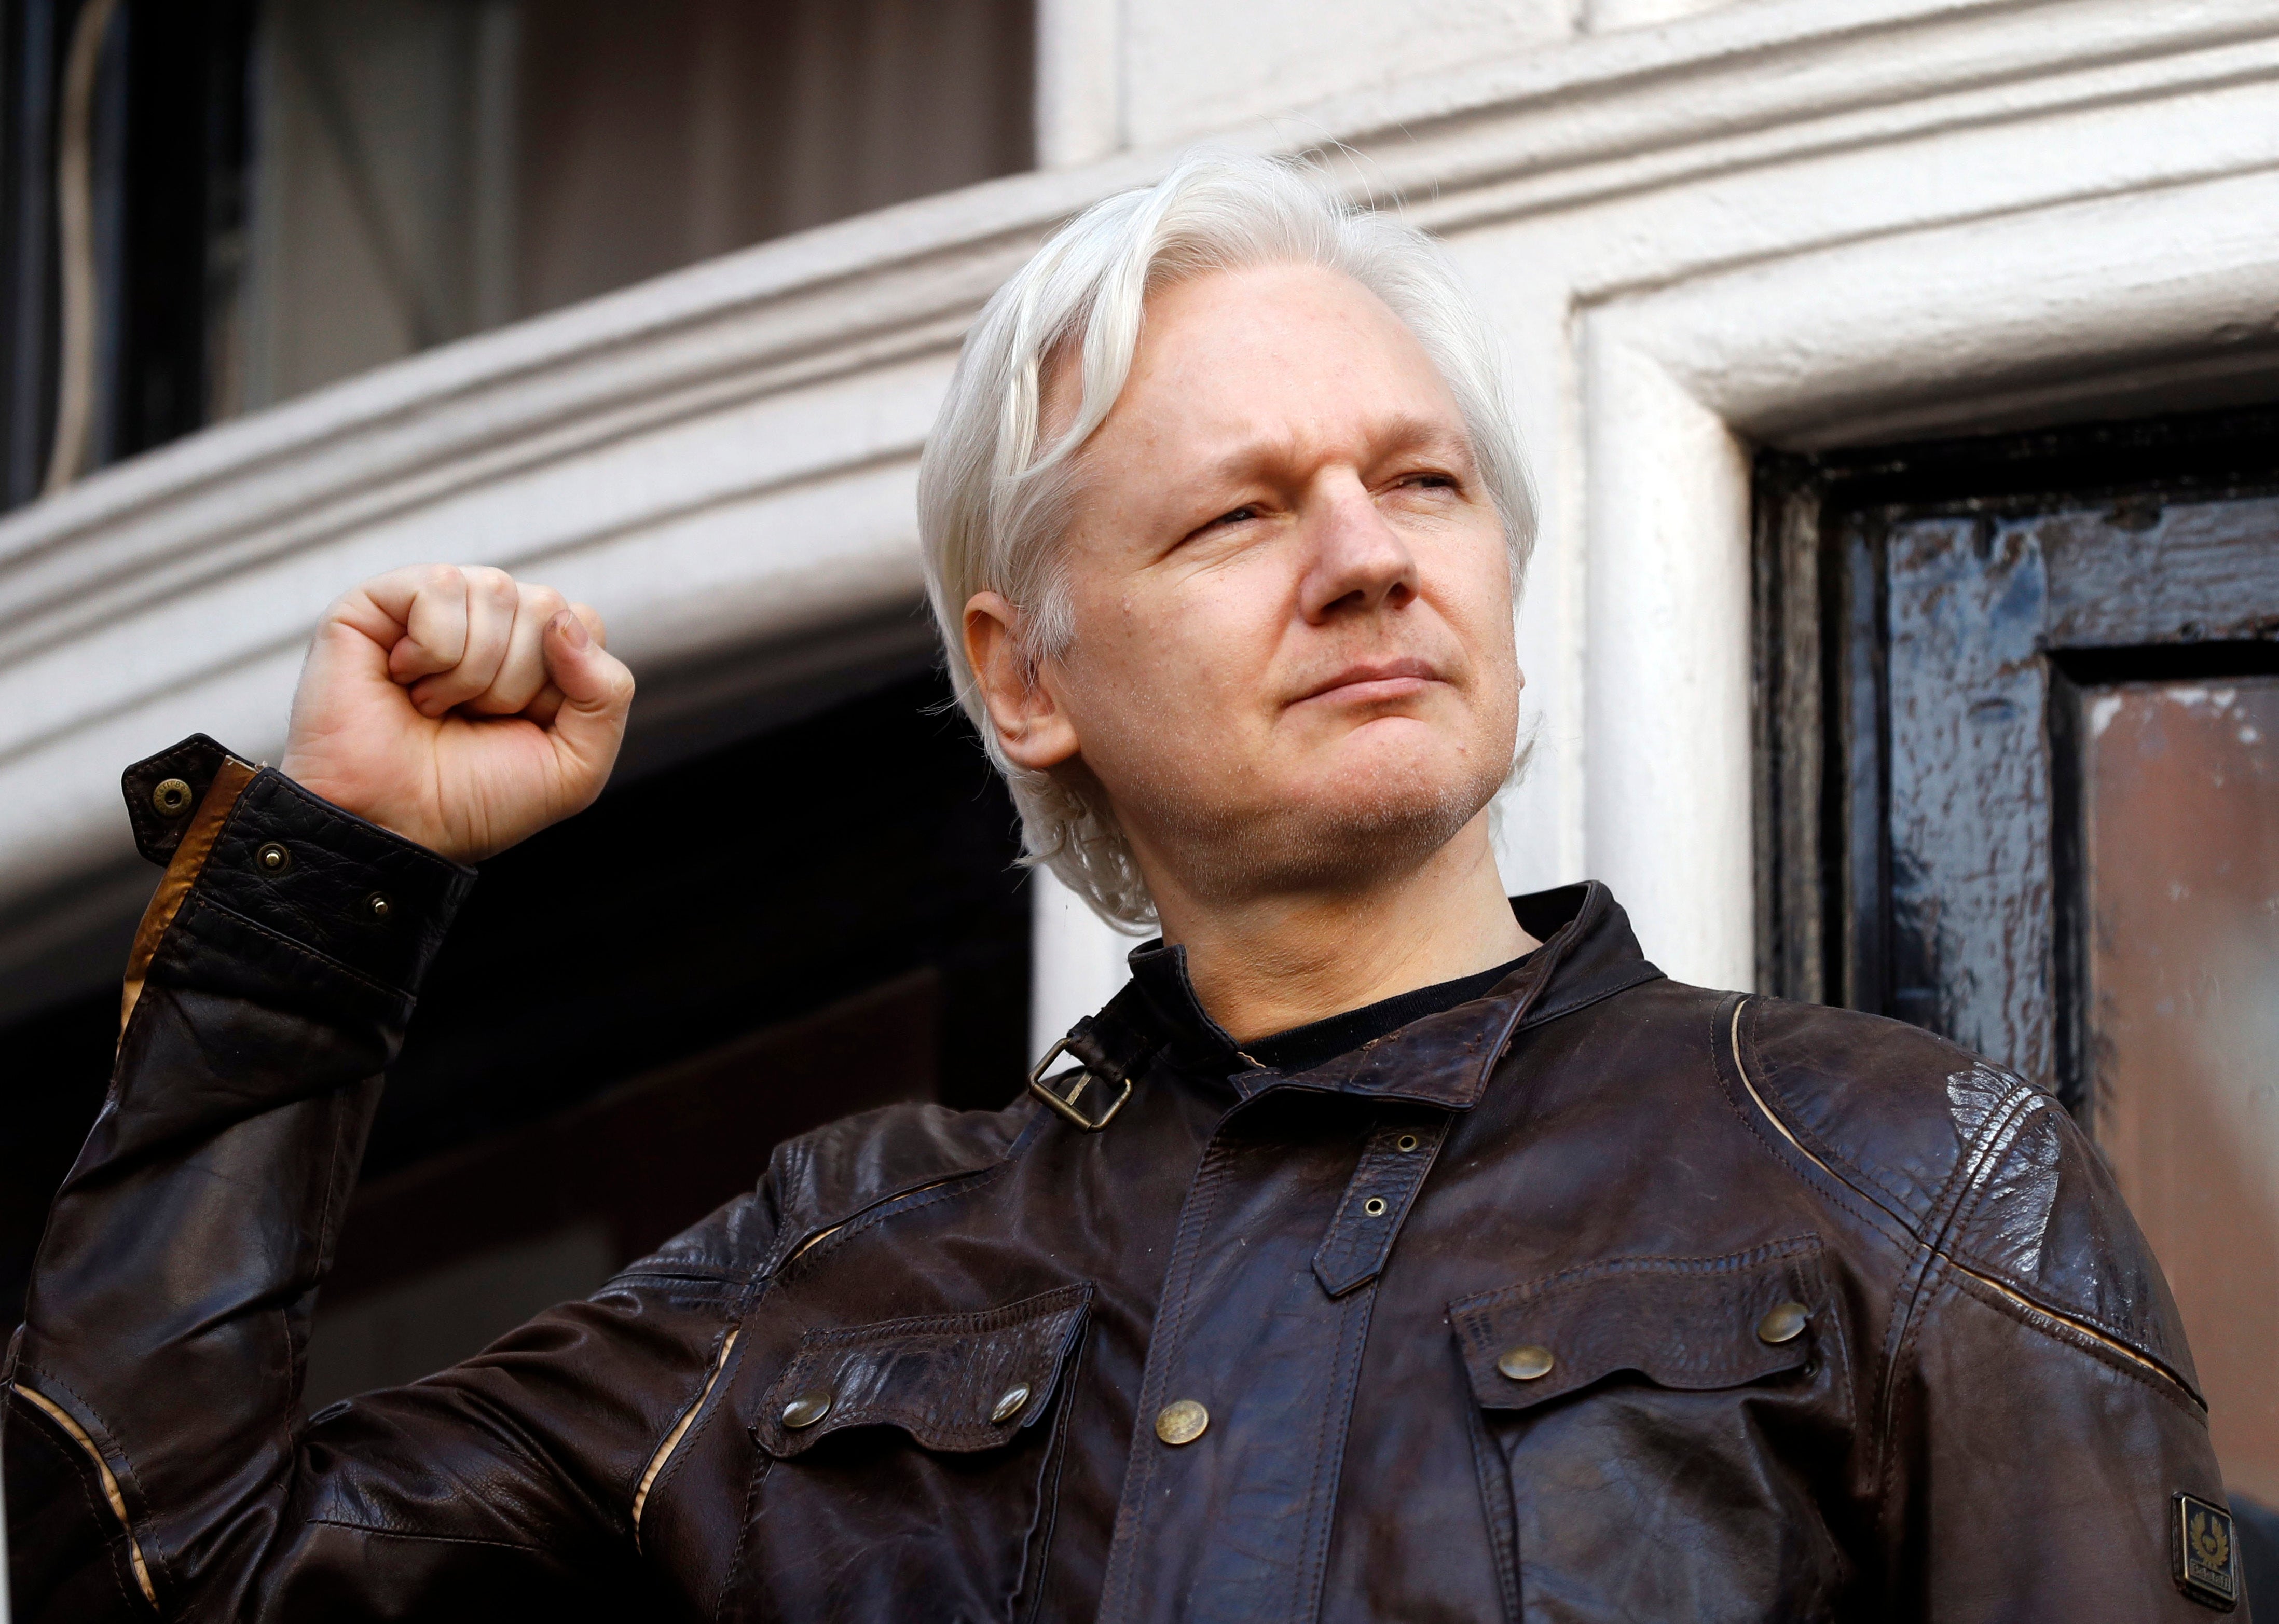 Julian Assange pictured in 2017 at the Ecuadorian embassy before his arrest and move to Belmarsh prison in 2019